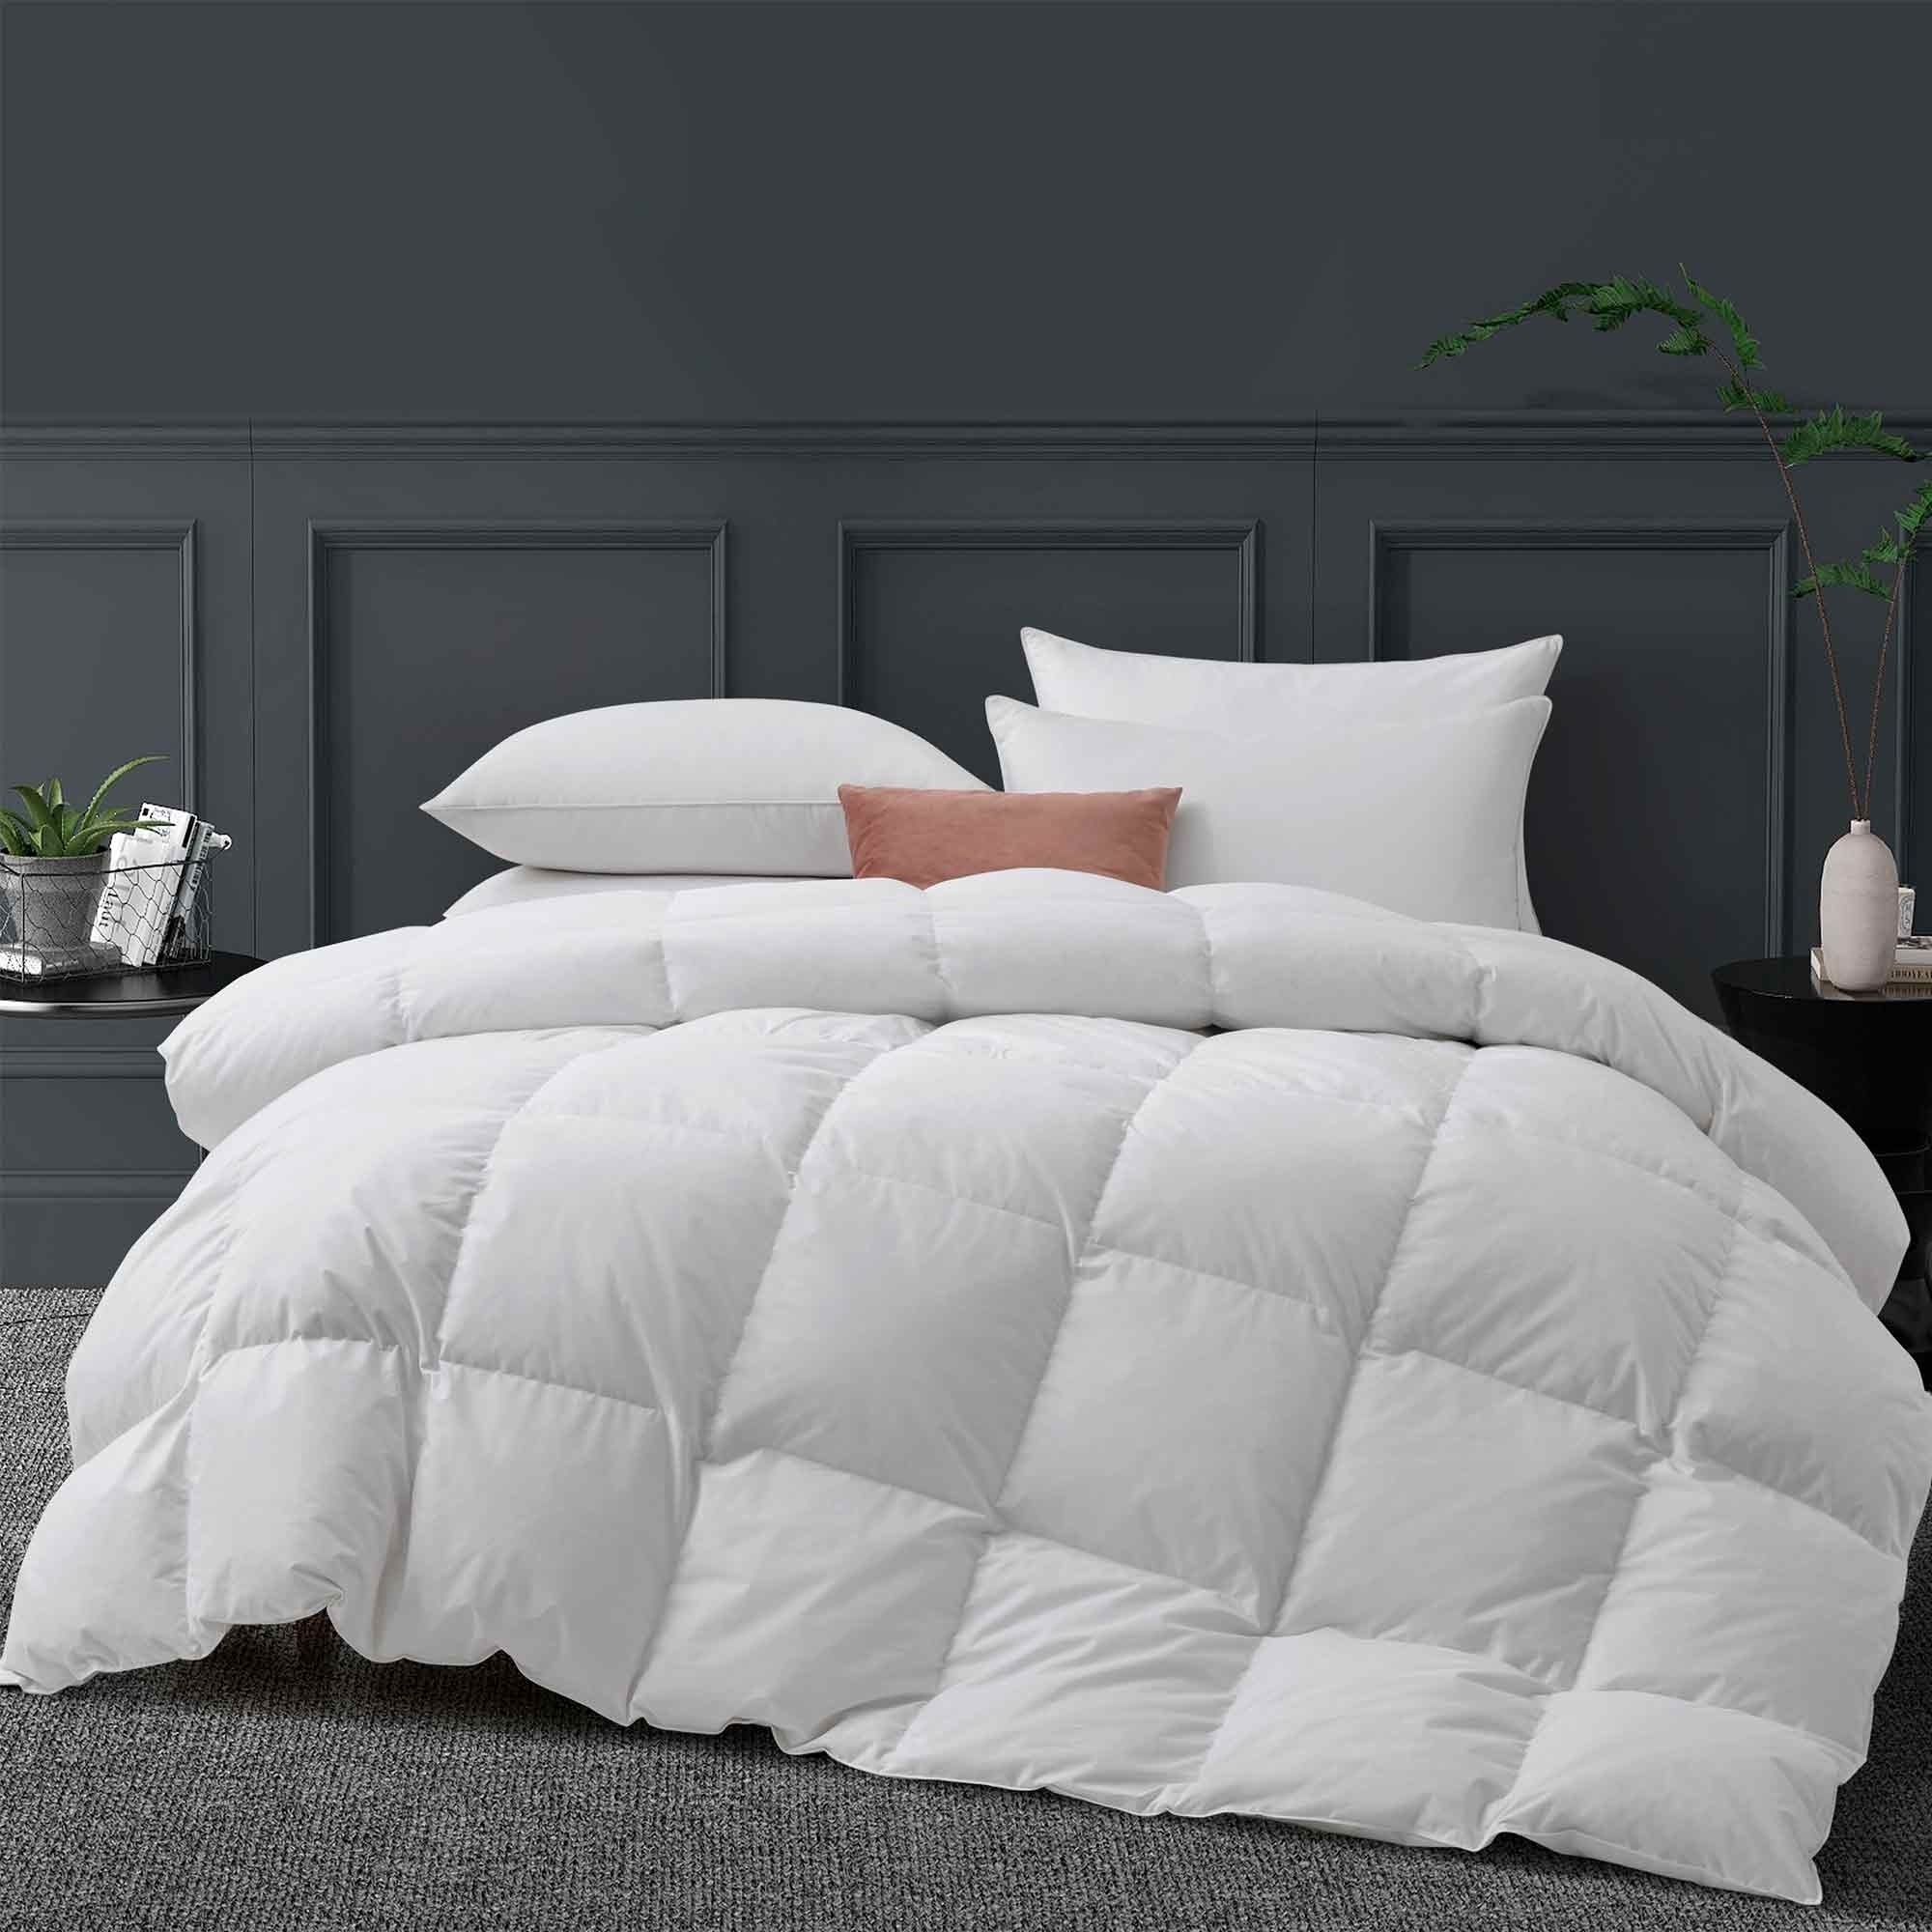 White Goose Feather And Down Comforters, Lightweight And Medium Weight Duvet Insert - Lightweight, Twin